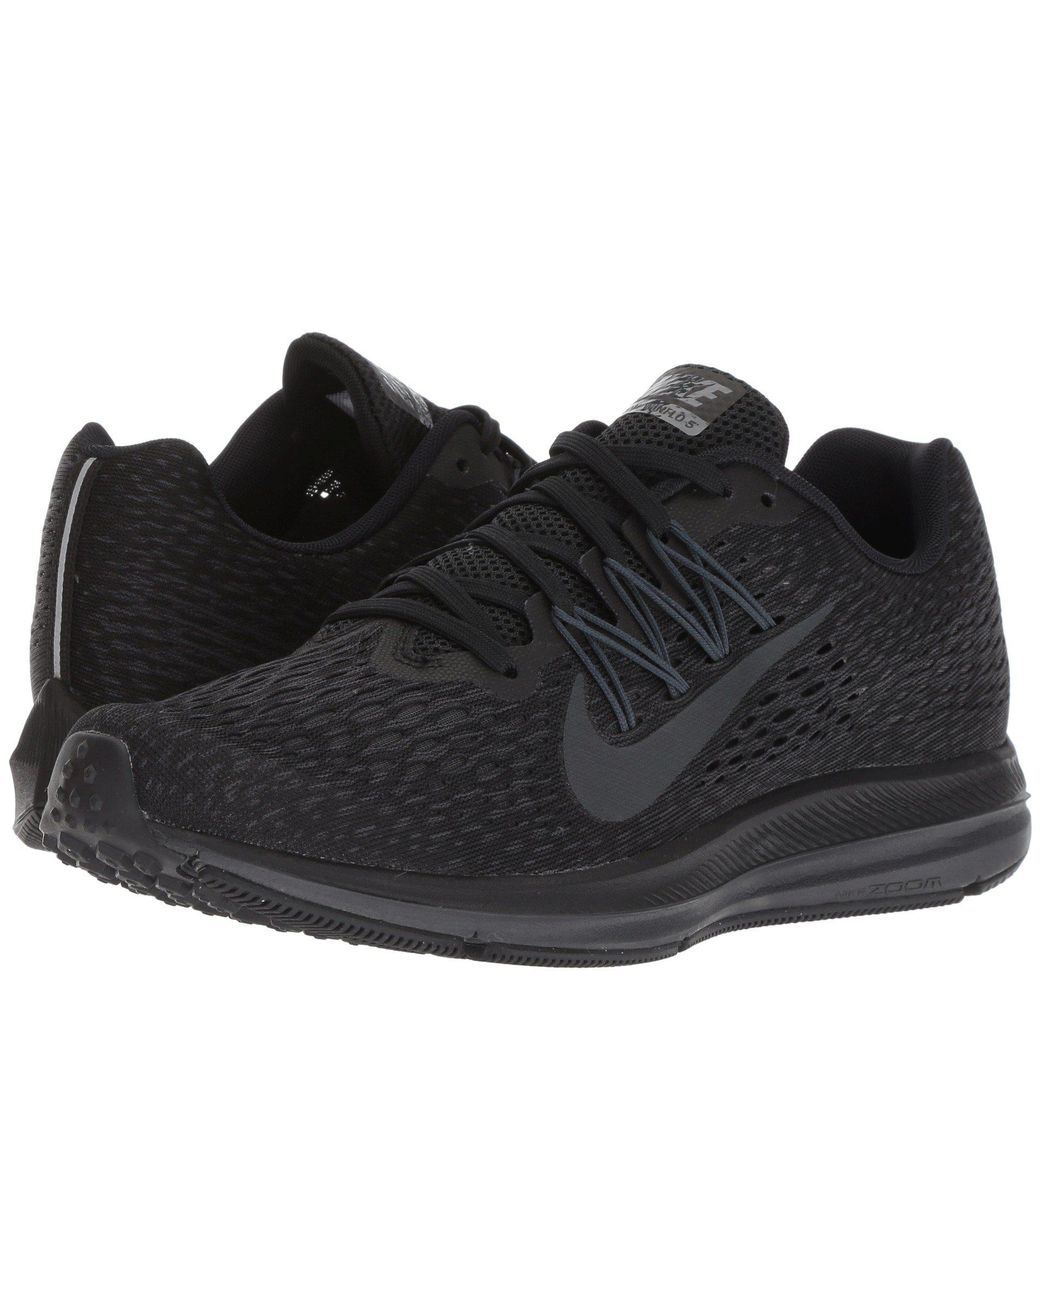 Nike Air Zoom Winflo 5 (black/anthracite) Running Shoes | Lyst